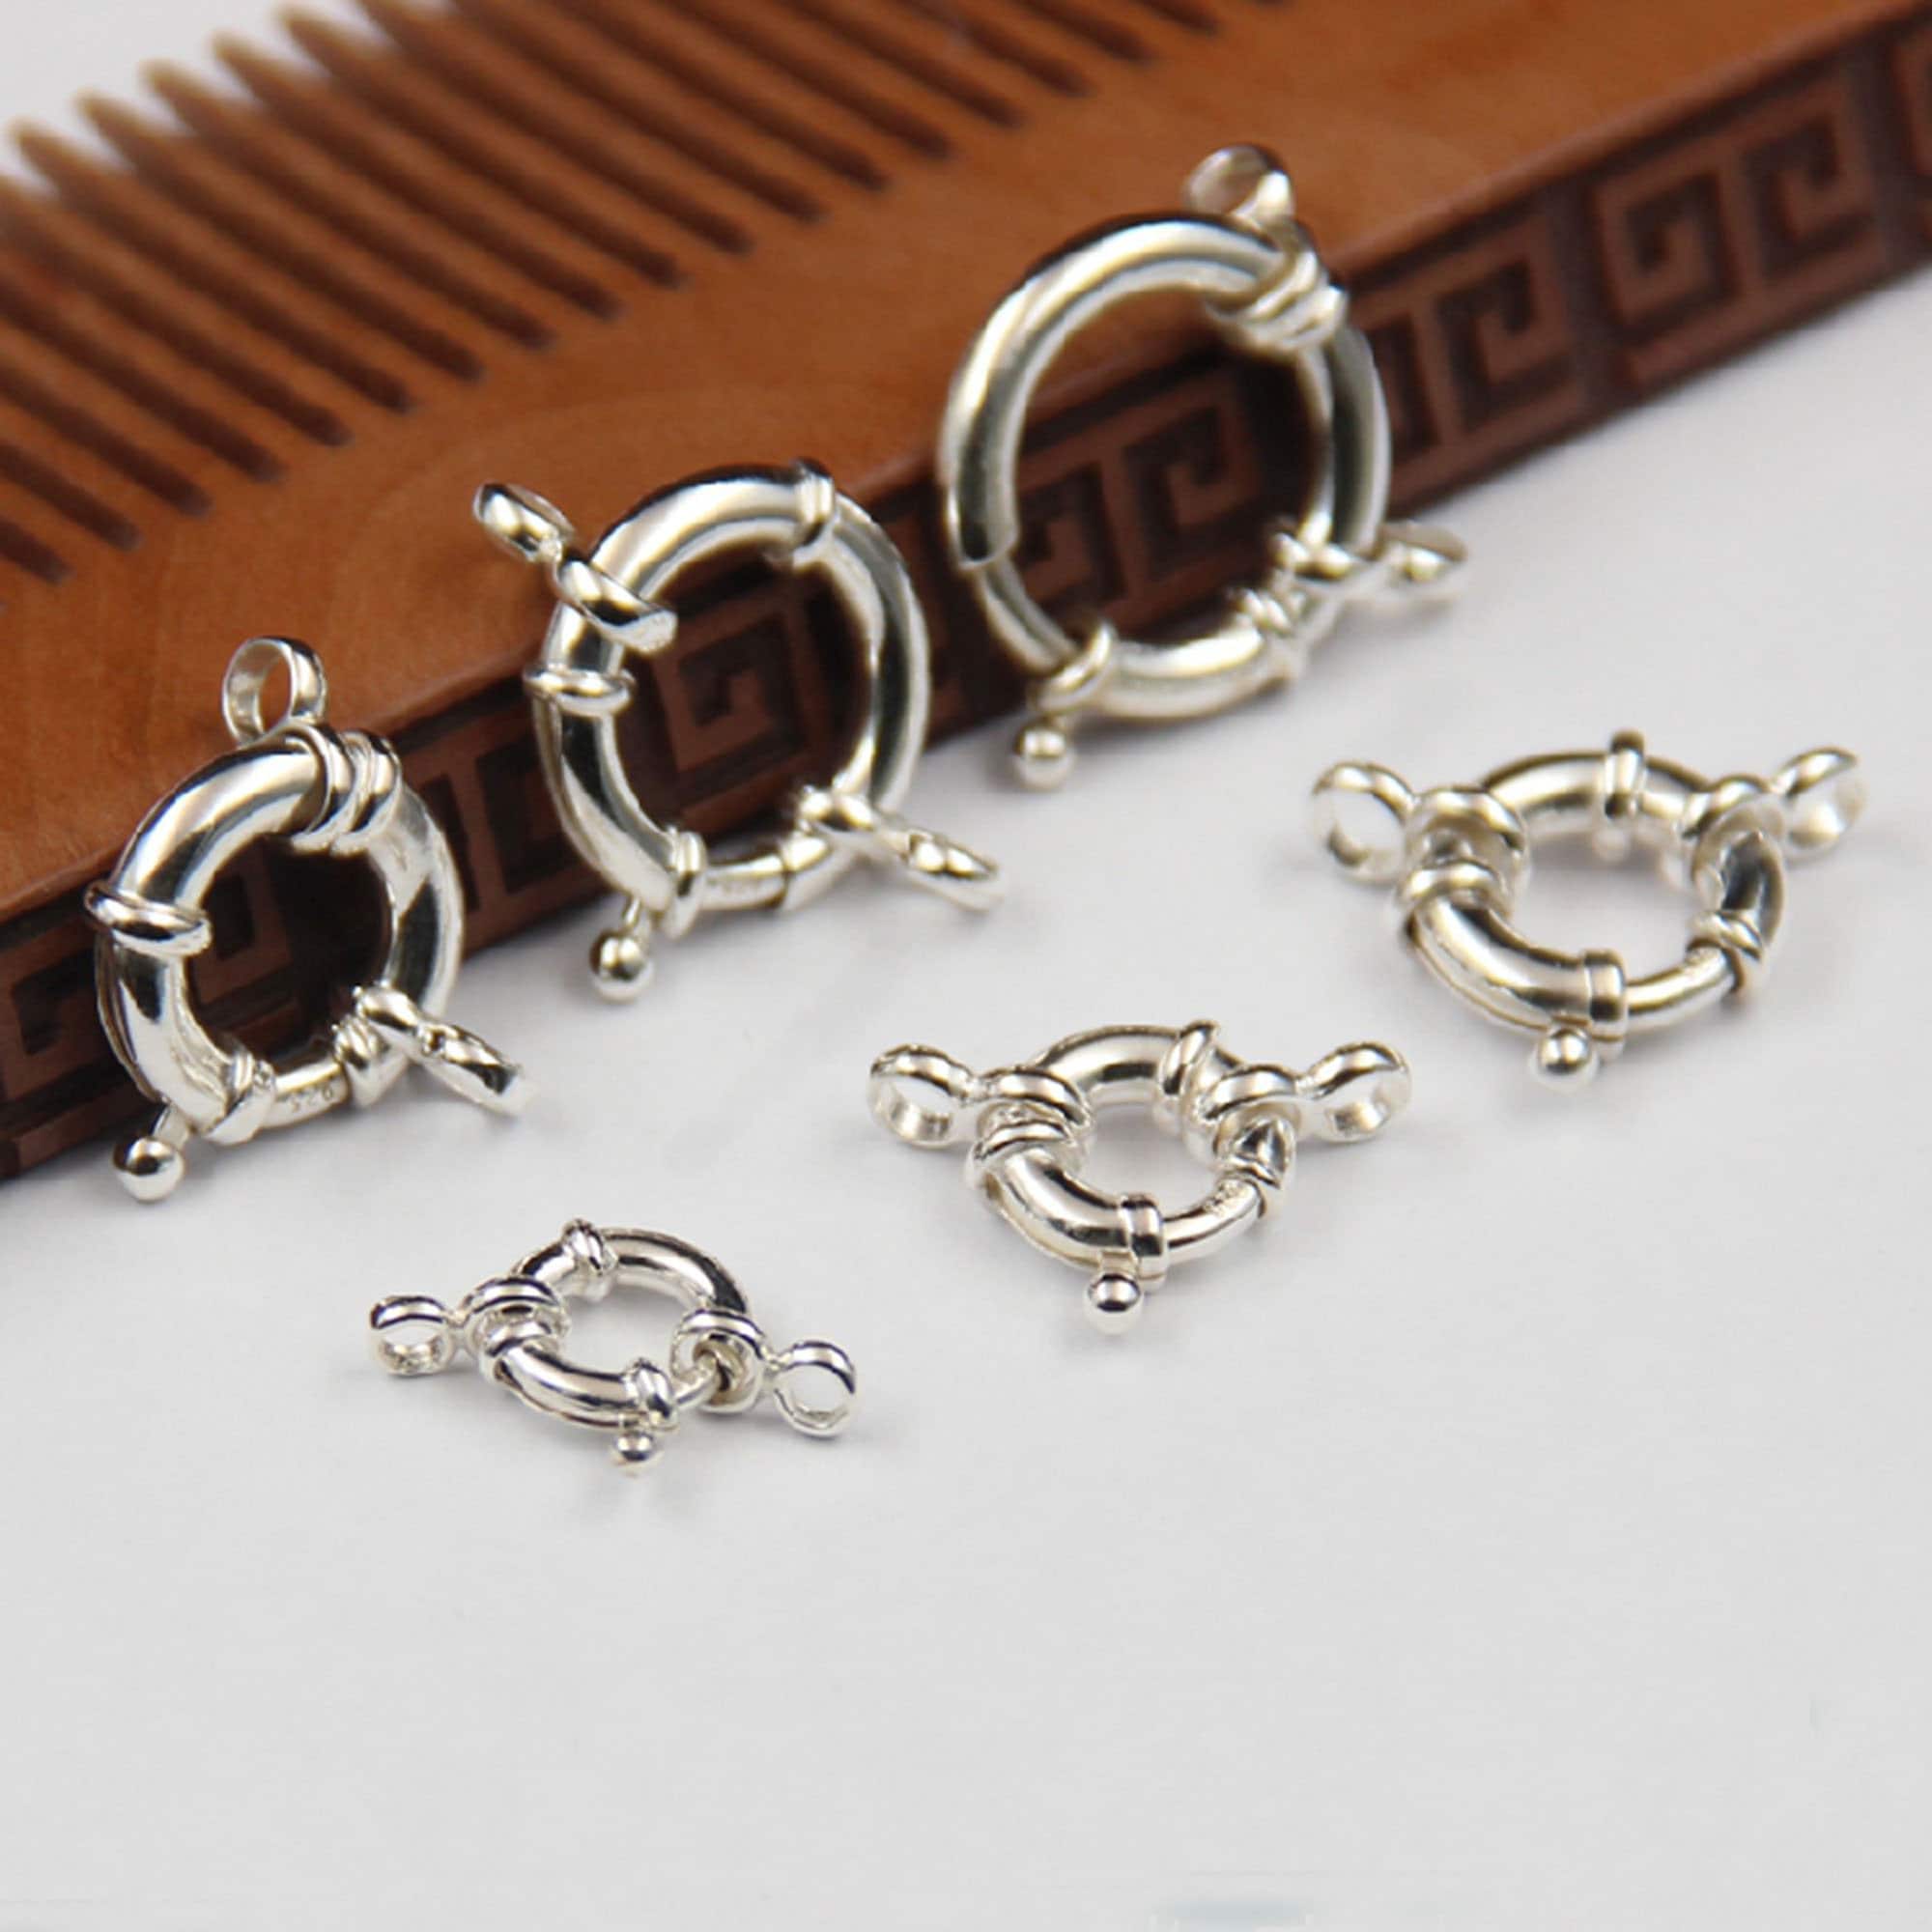 925 Sterling Silver Spring Ring Clasps, 10.8 mm Large Bolt Clasp #640, 2  Strand Necklace Clasps